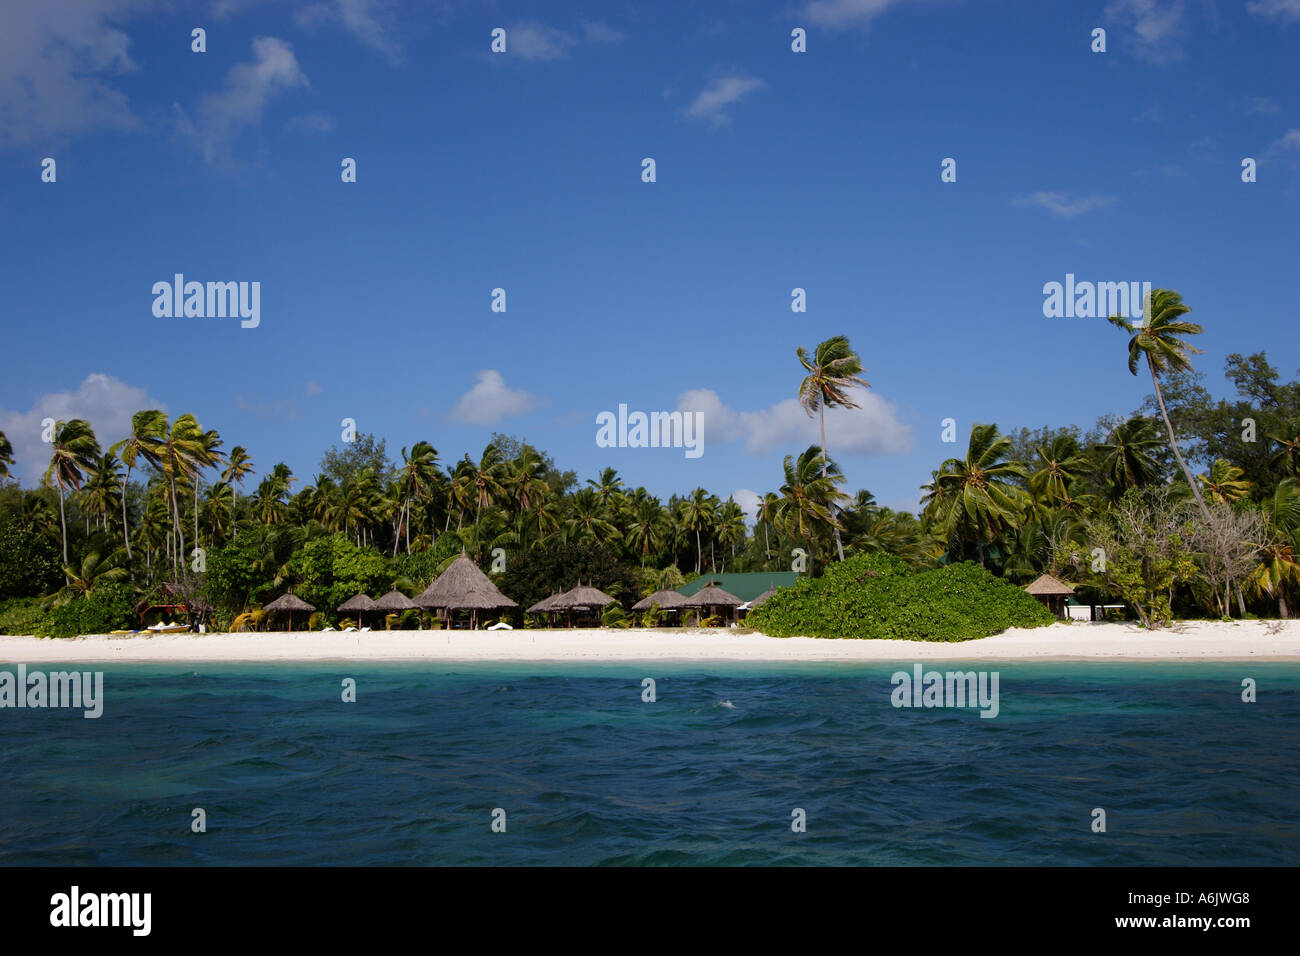 Tropical Beach With Palm Huts Stock Photo Alamy